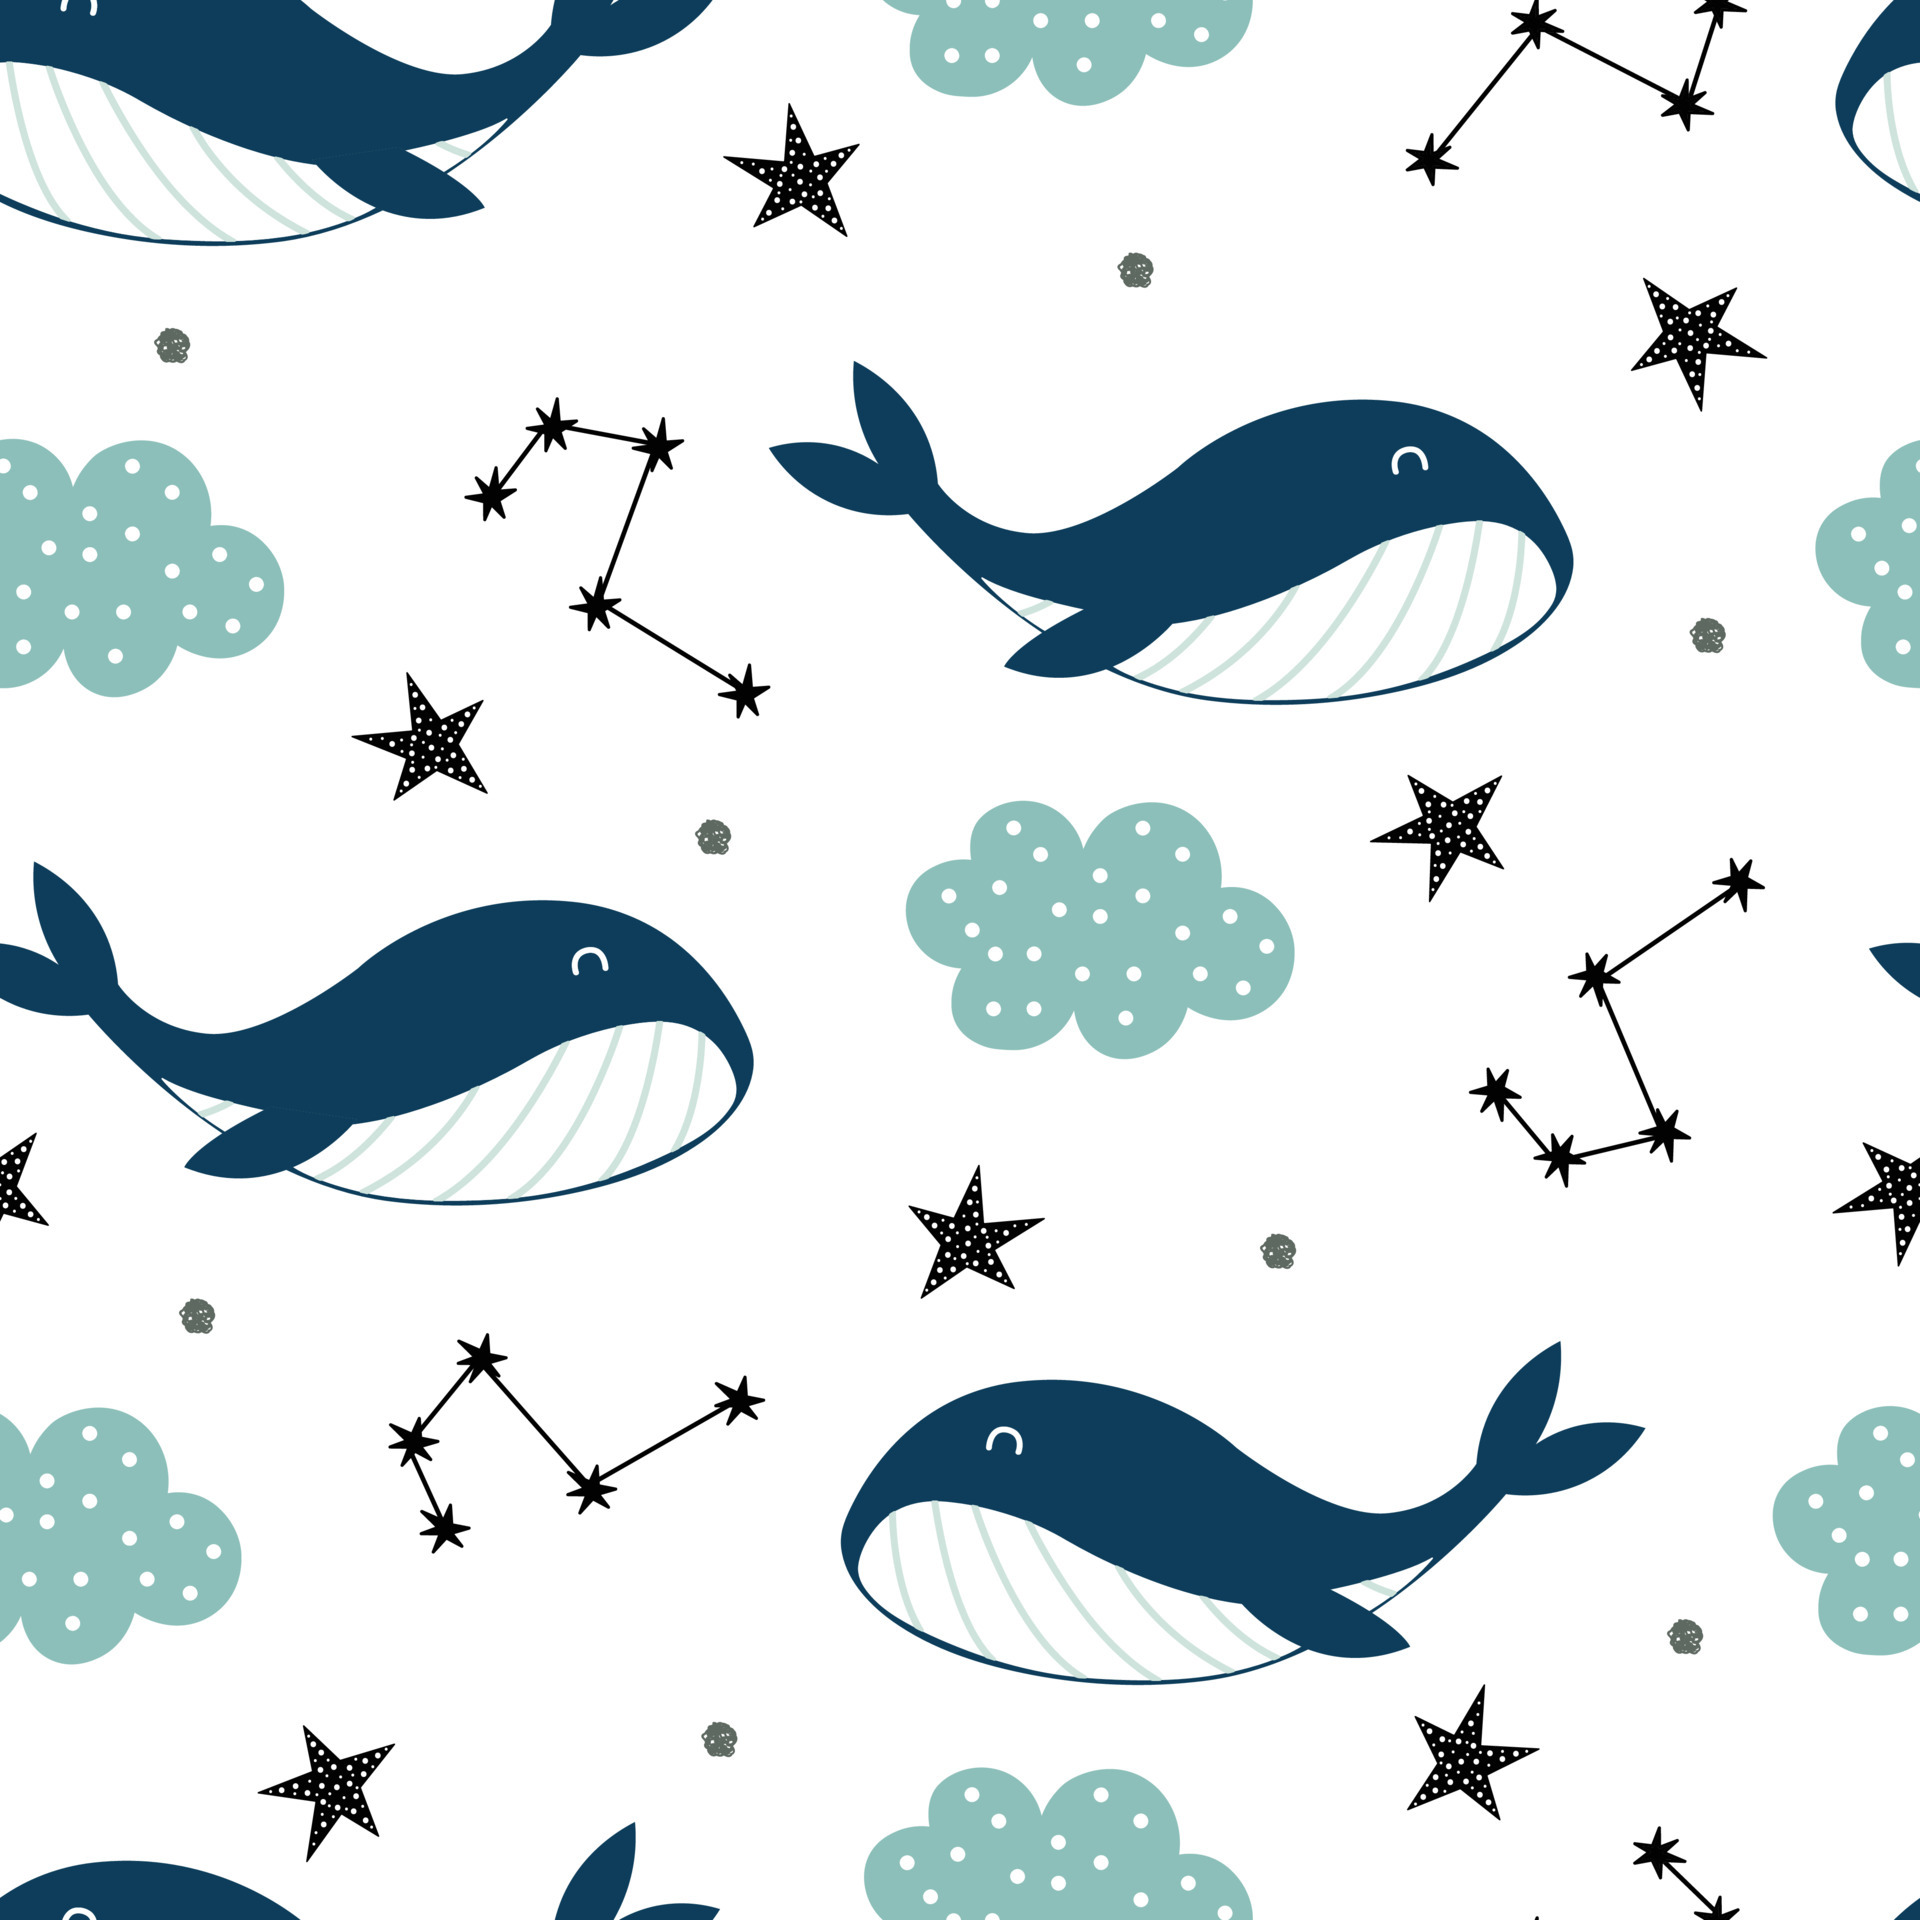 Blue whale with sky and stars seamless cute cartoon background. Designs used for textiles, clothing styles, prints, wallpaper, vector illustrations